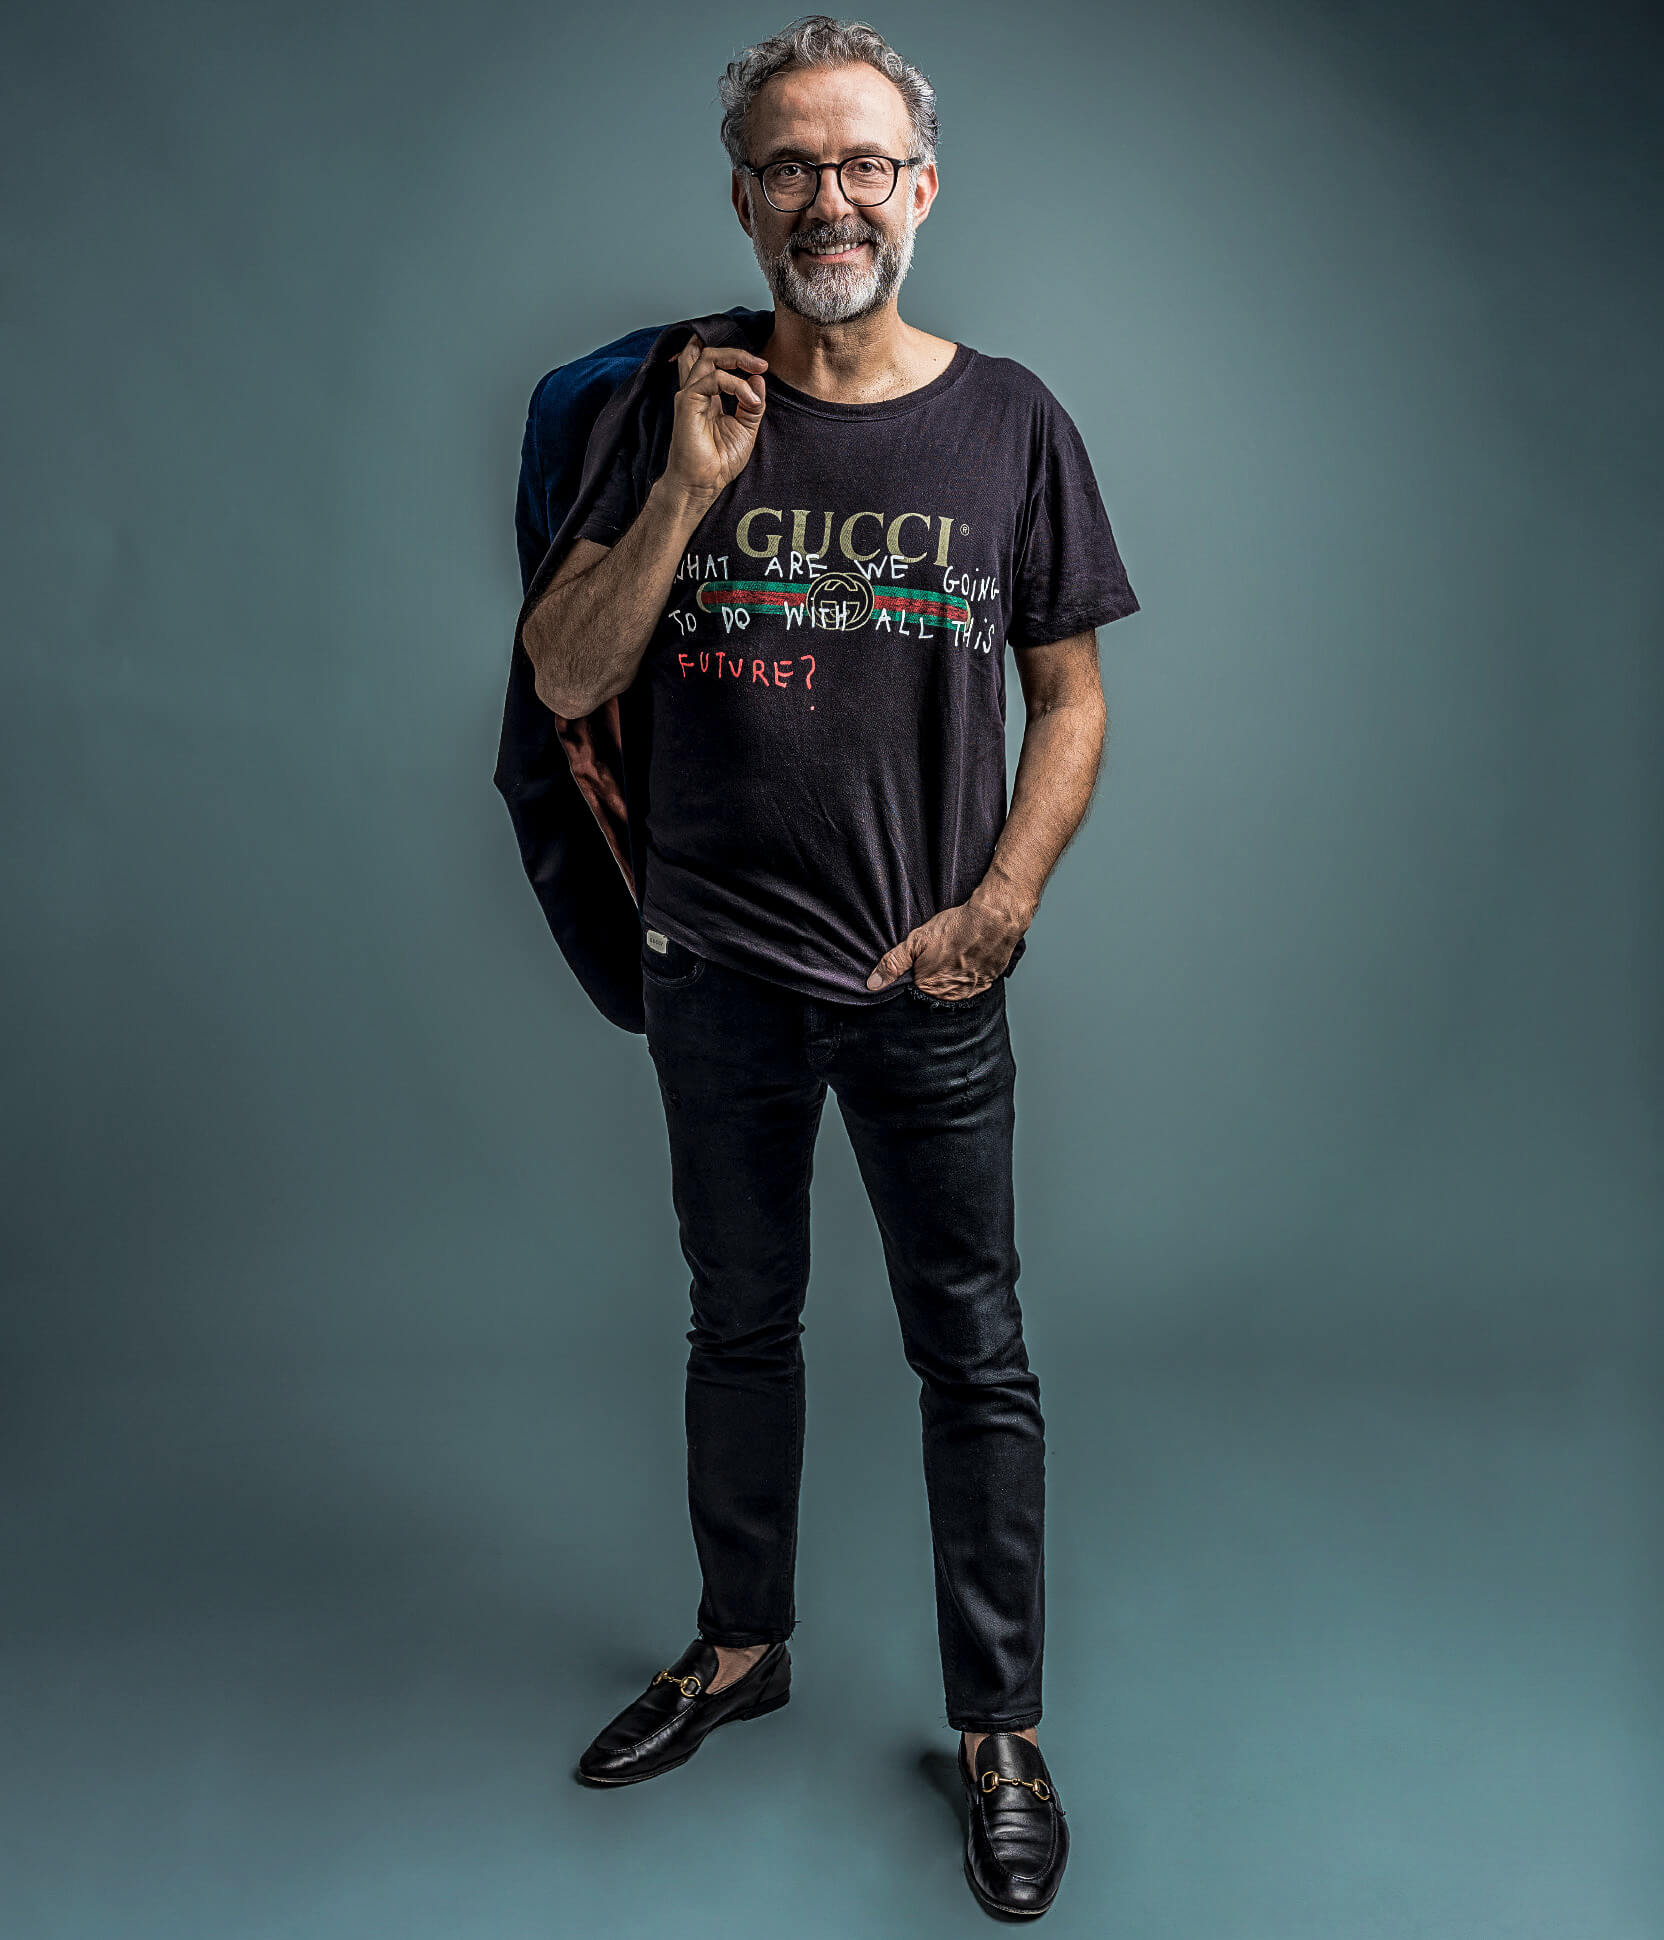 Massimo Bottura, status chef and ambassador of the Italian luxury culinary craft, who is also the founder of a social revolutionary soup kitchen 